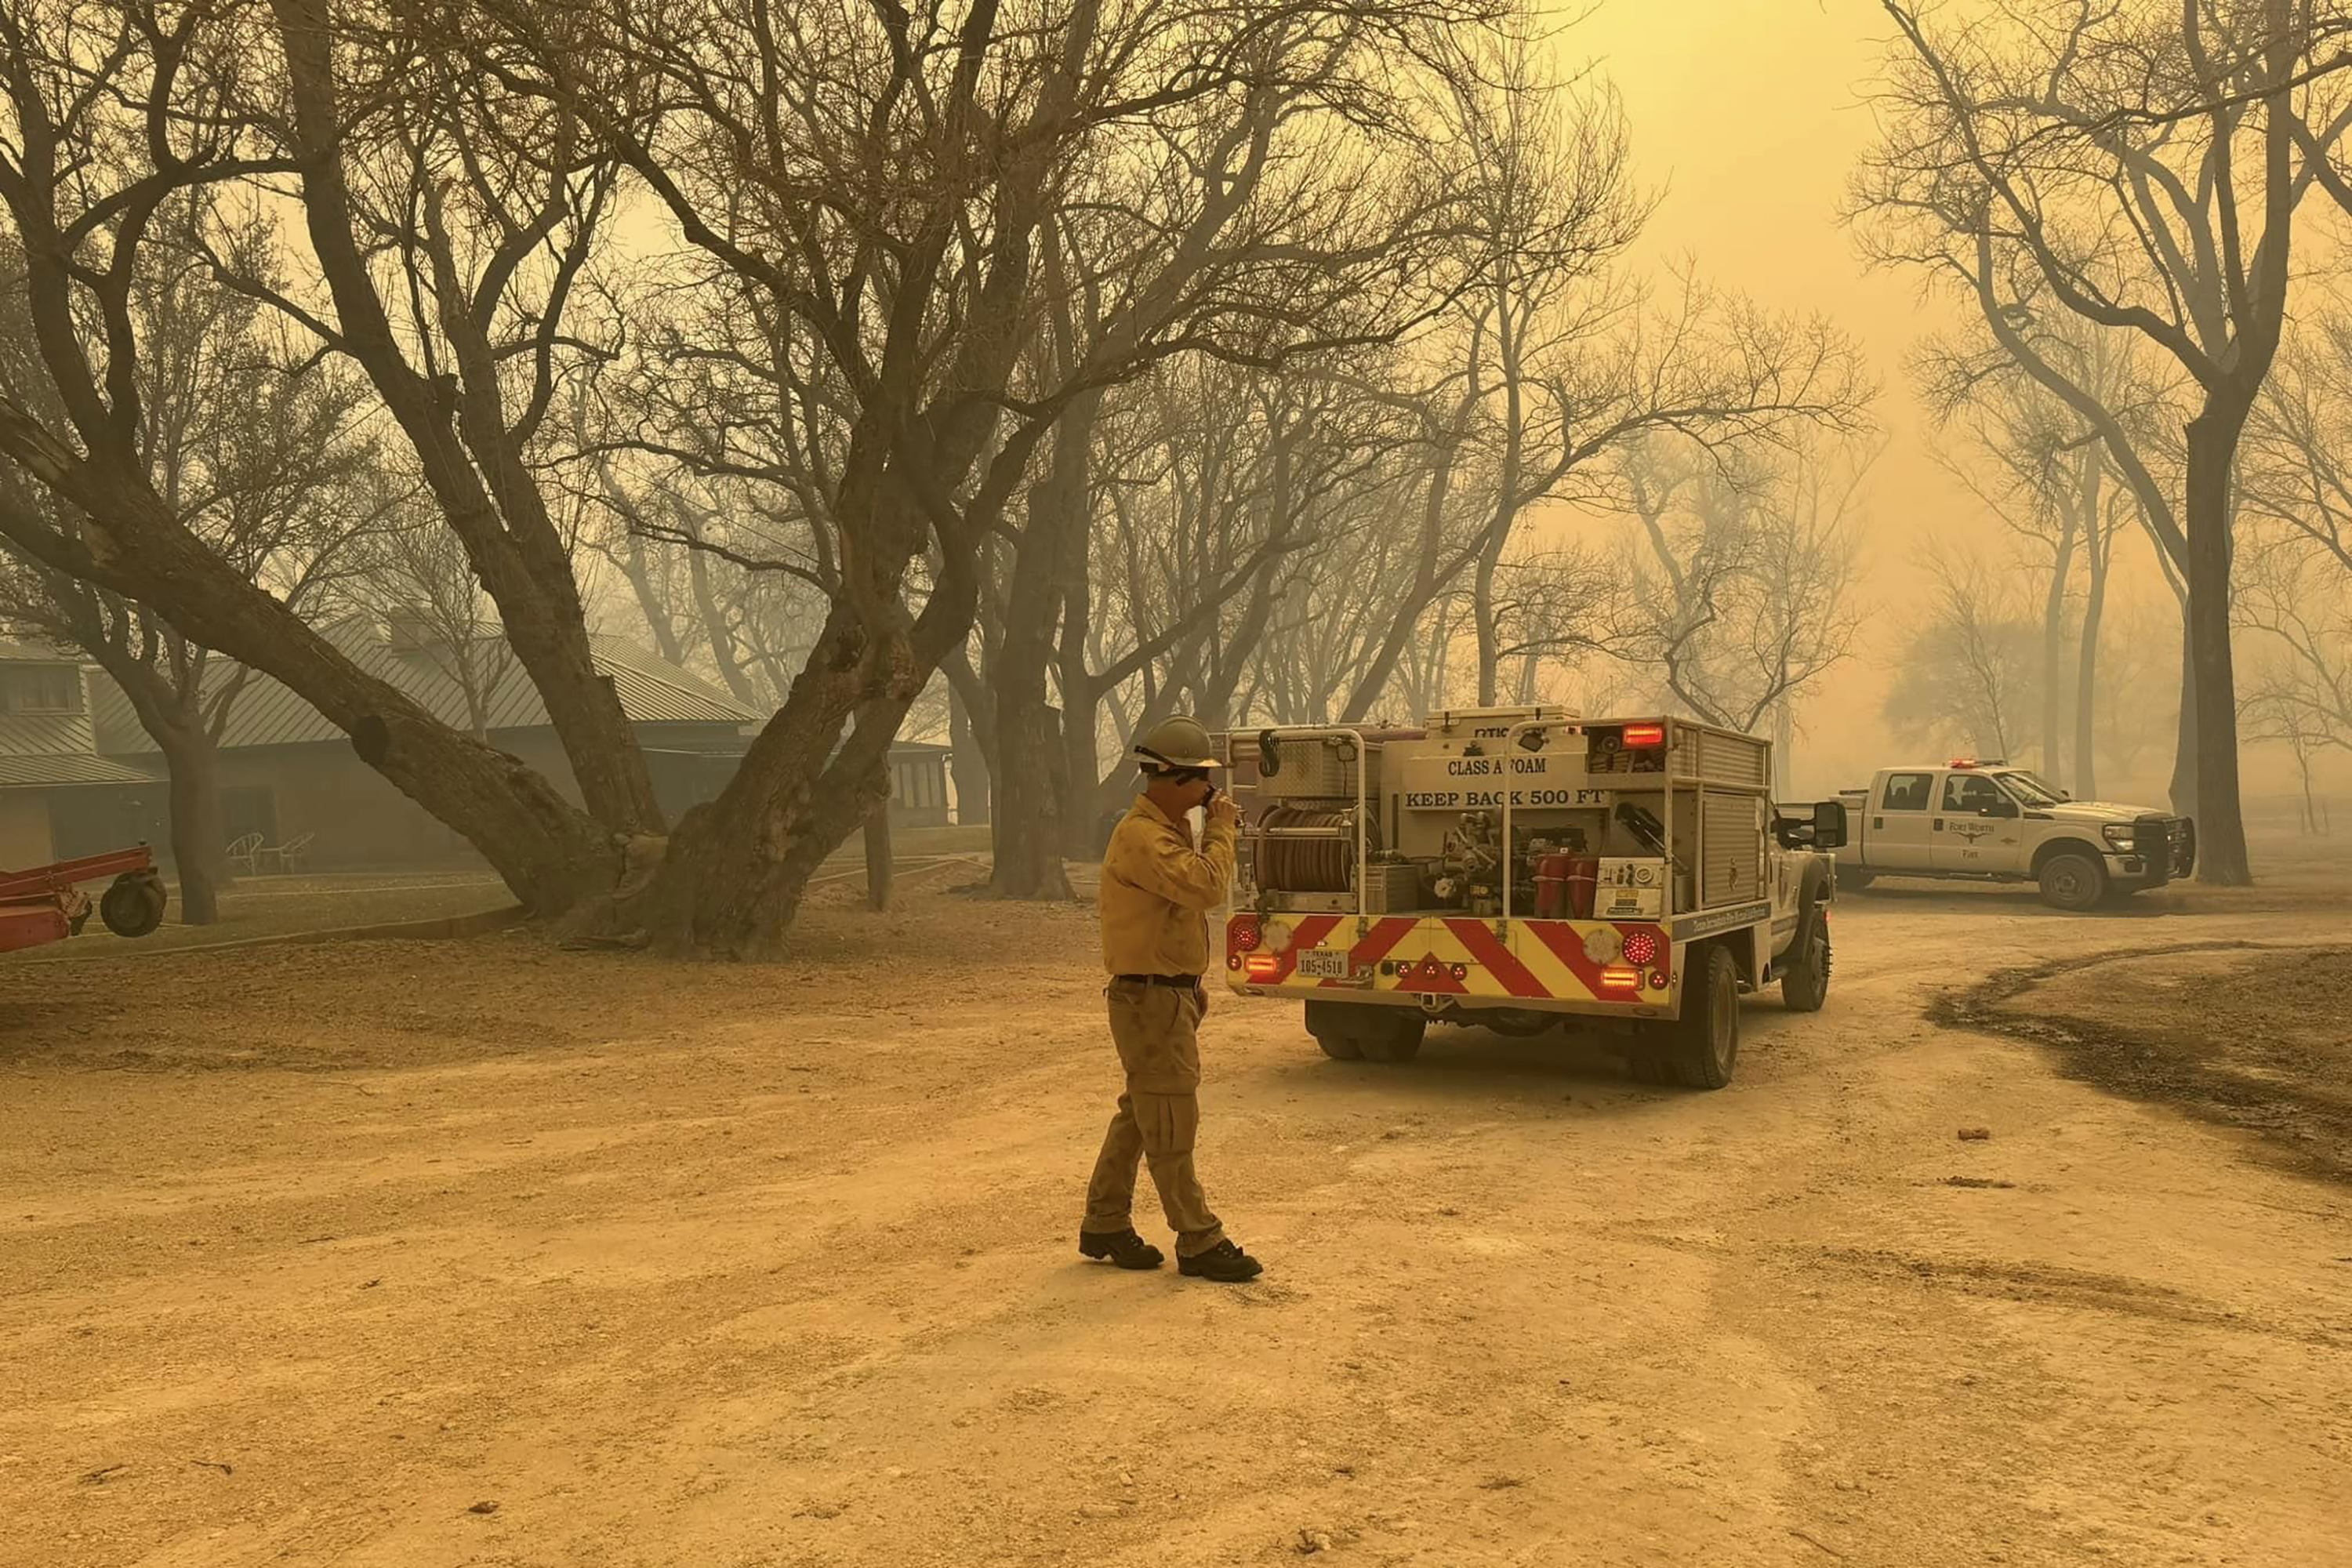 Different police and fire departments across Texas have mobilized units to help crews battle Smokehouse Creek Fire.